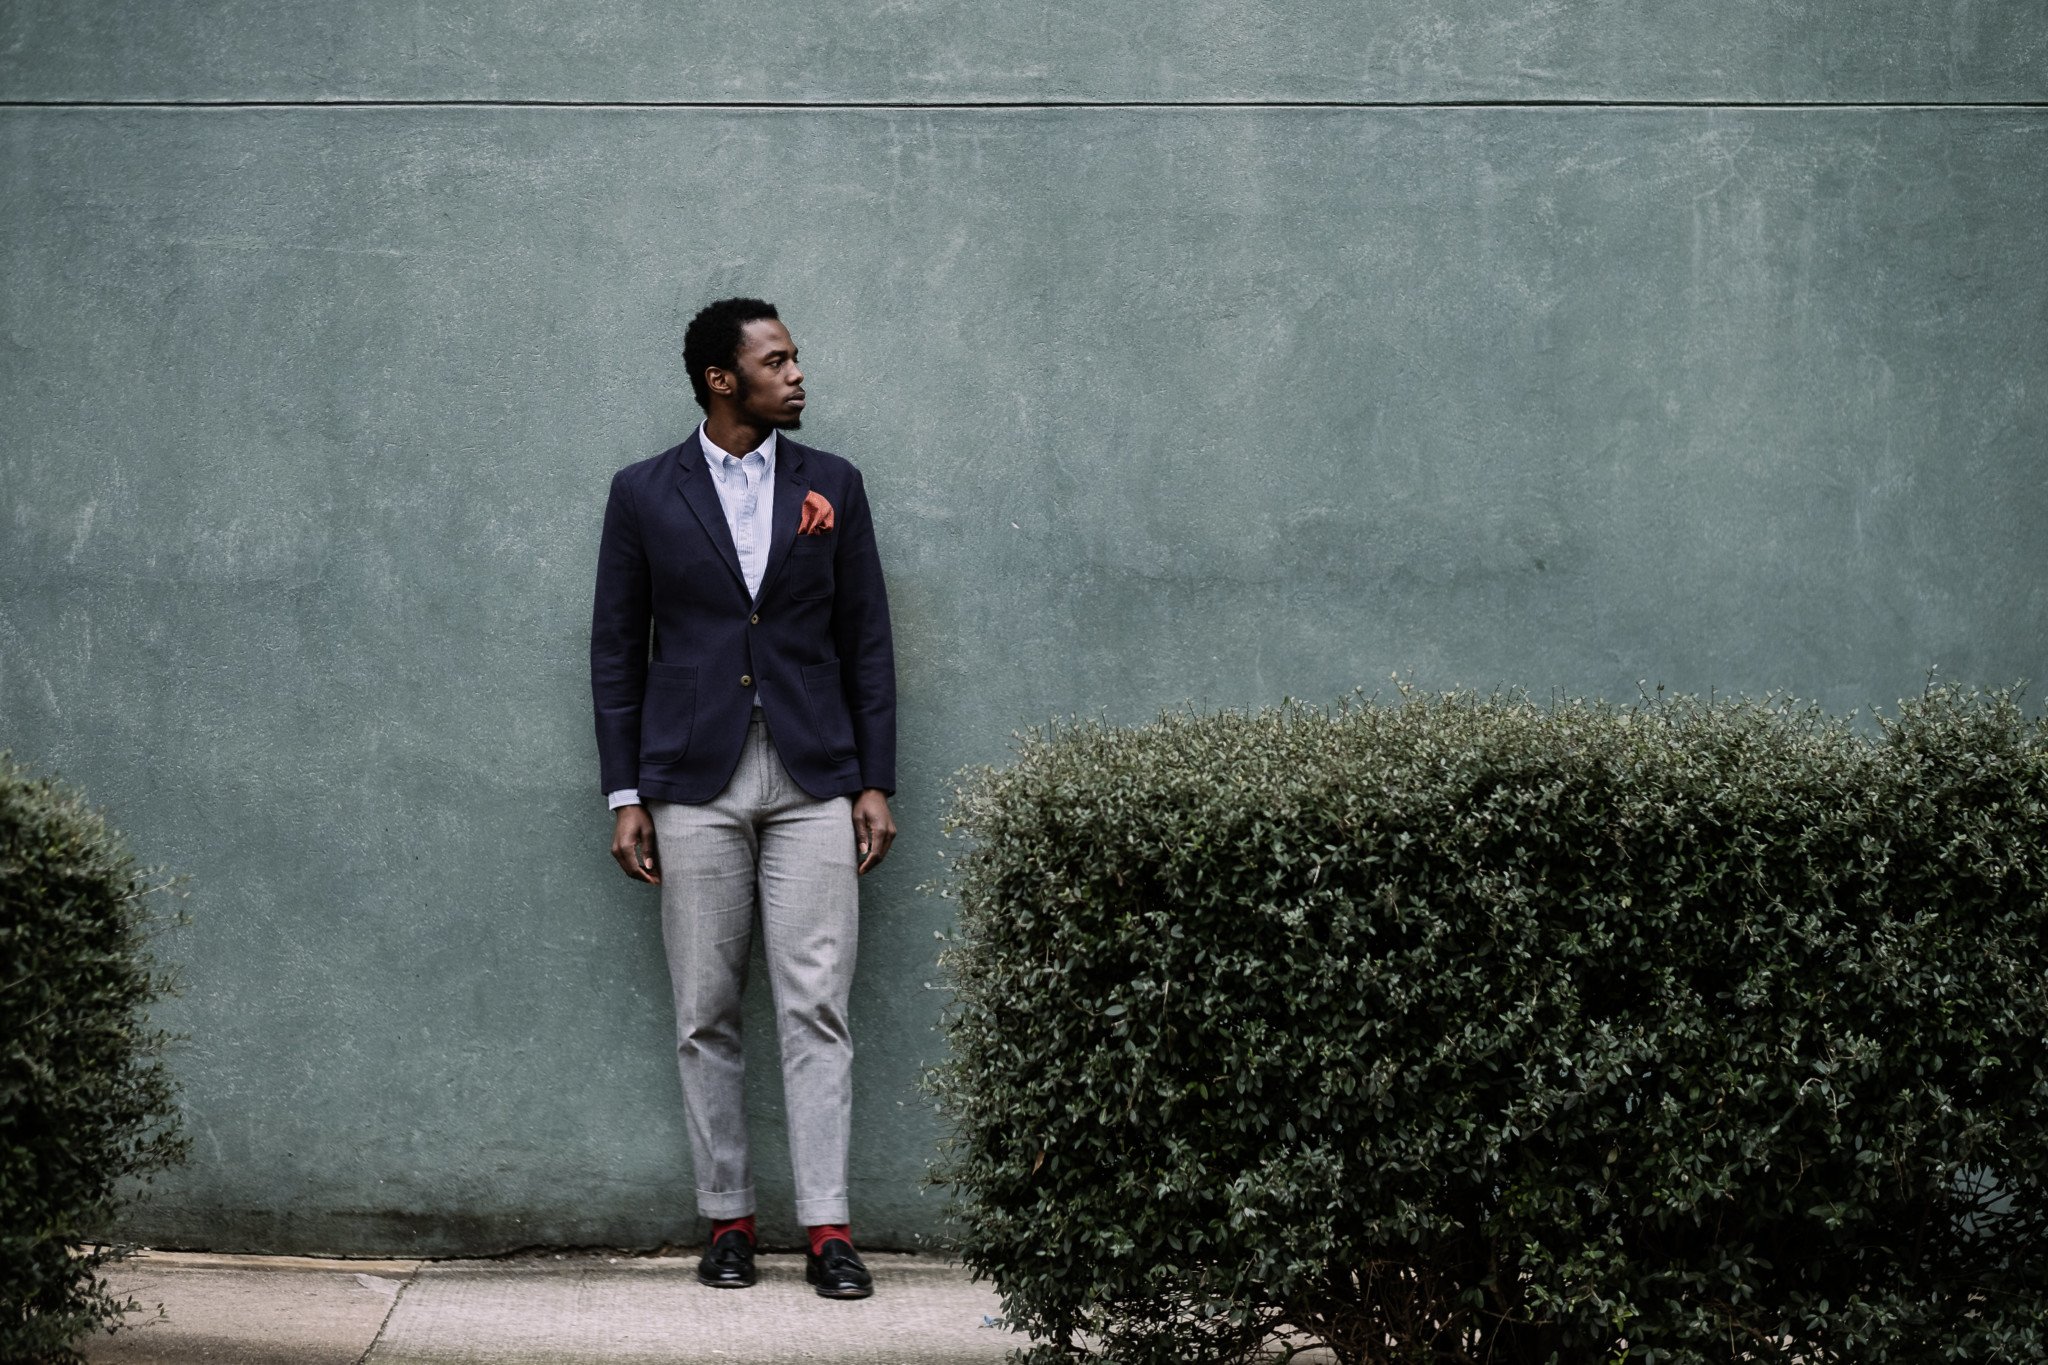 Street Fashion Portraiture Proves The South Has Style